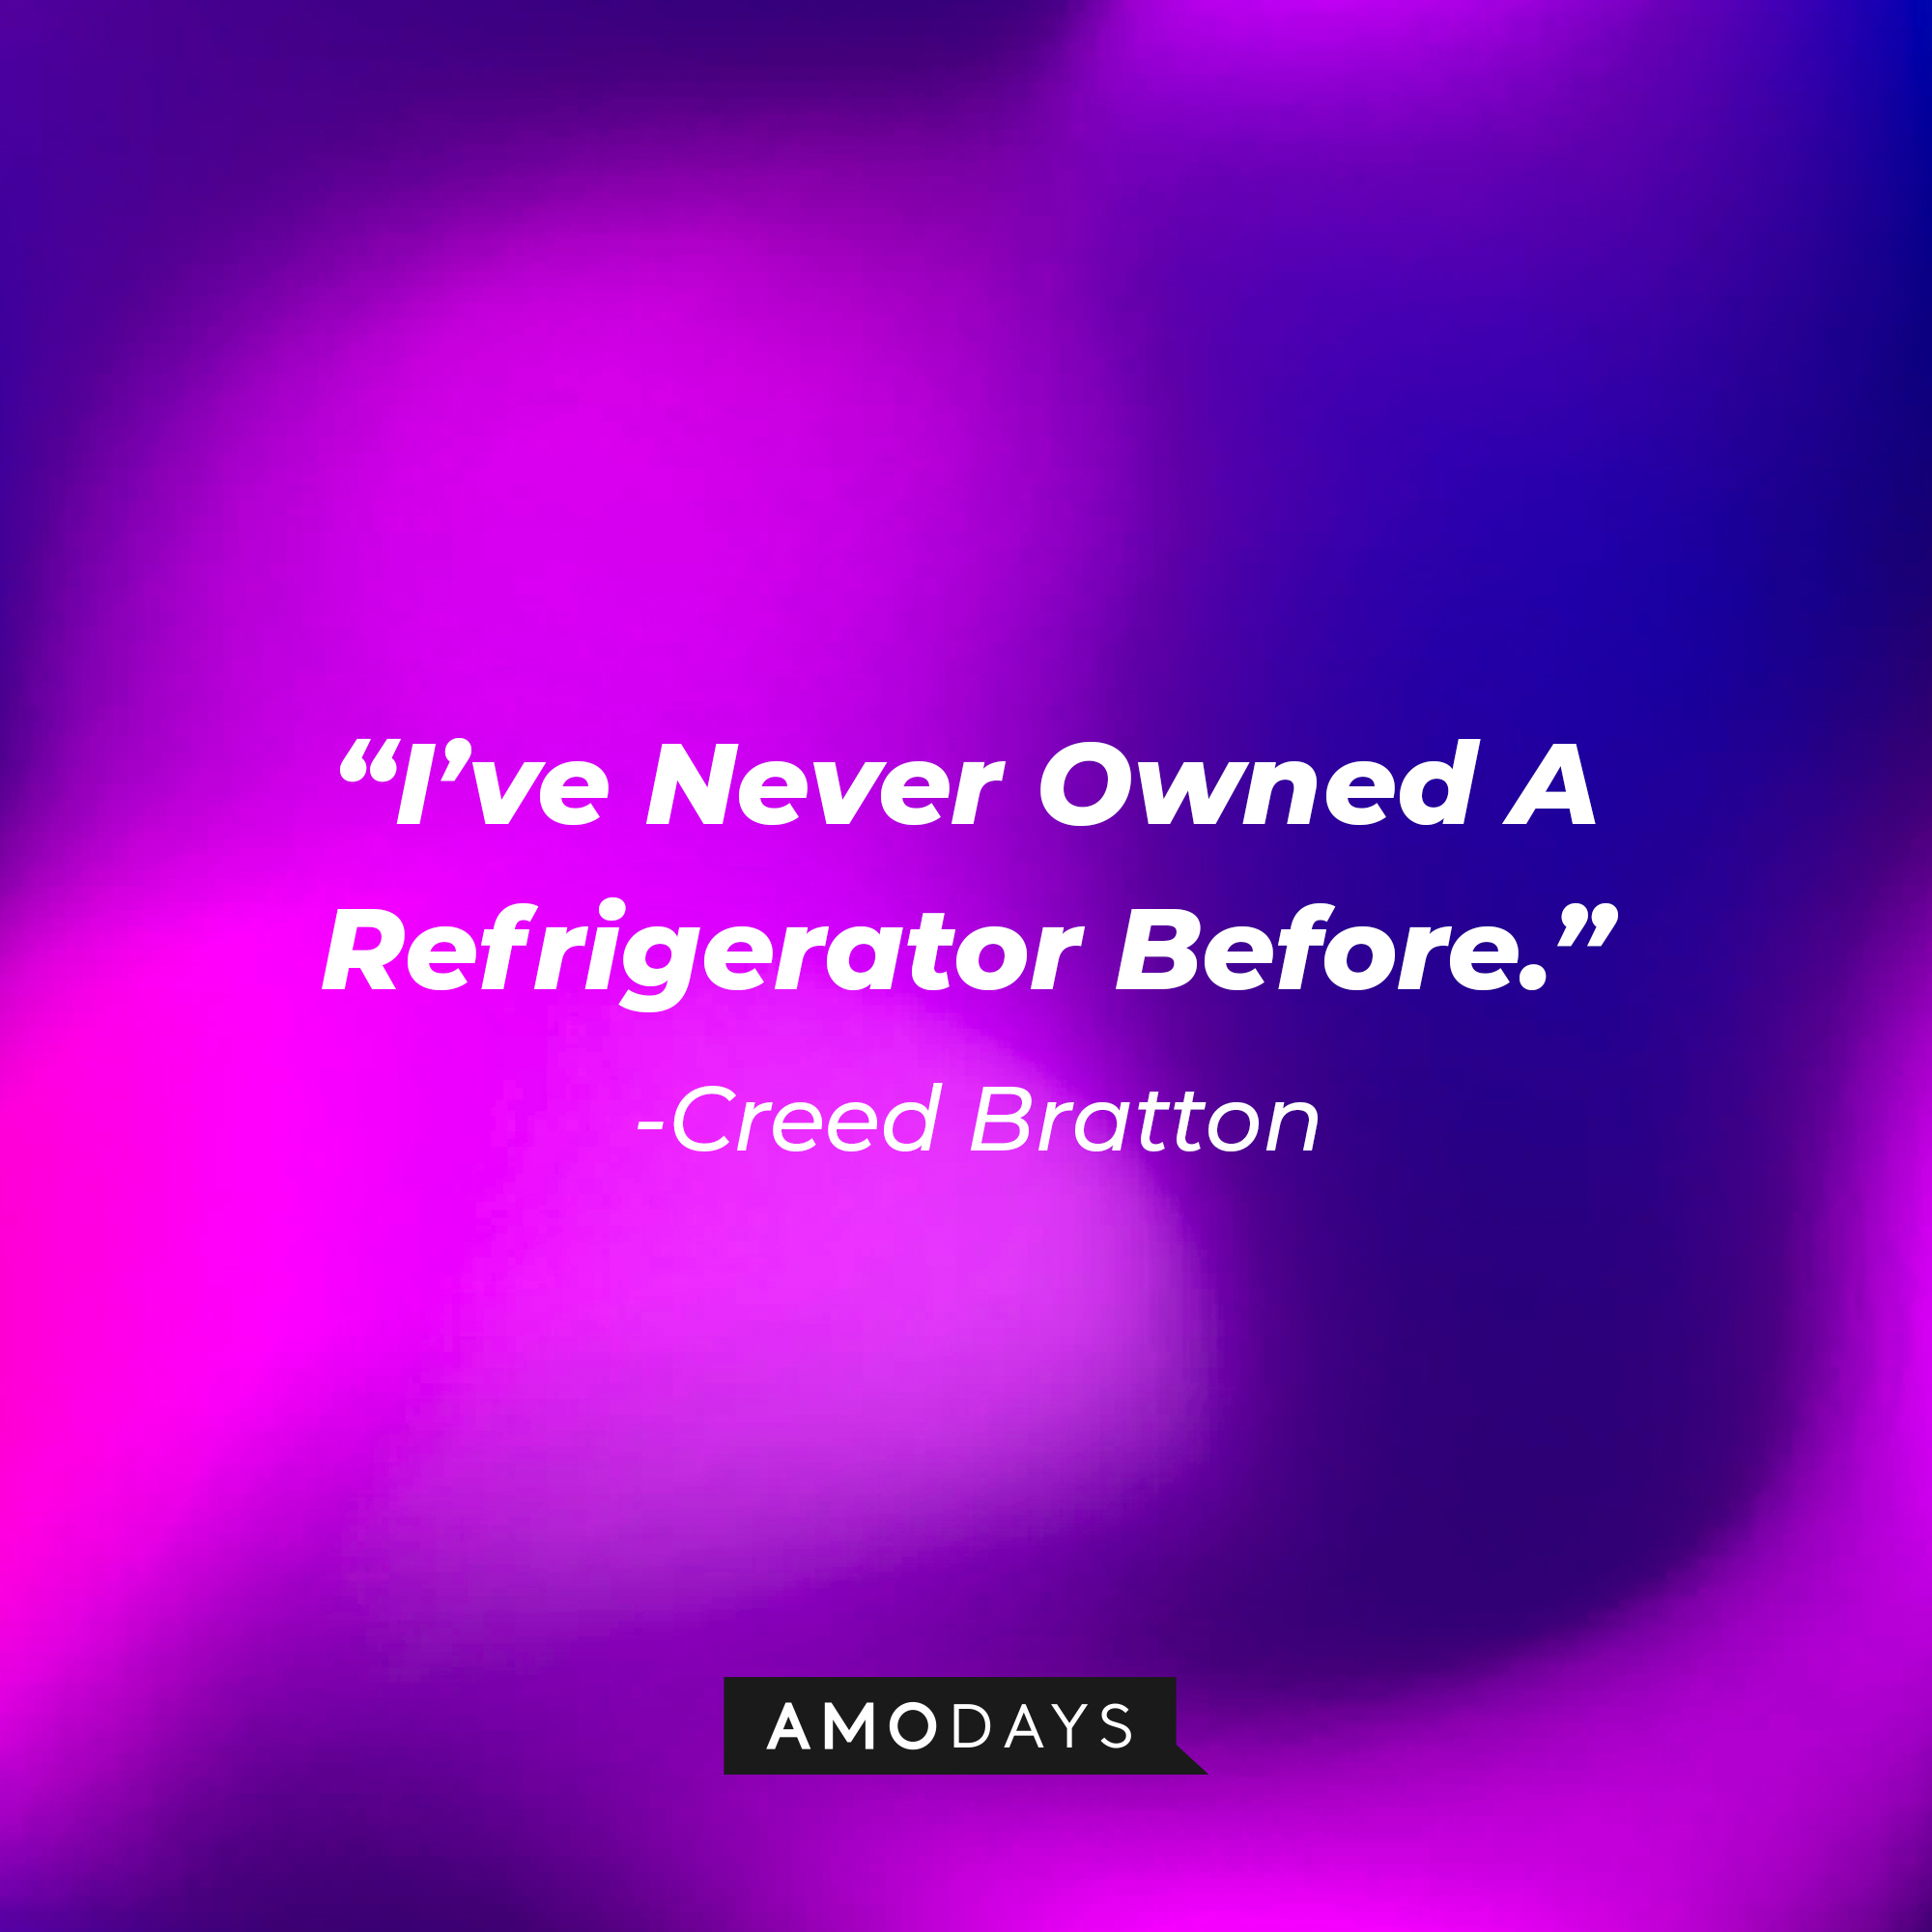 Creed Bratton's quote: "I've Never Owned A Refrigerator Before." | Source: Amodays